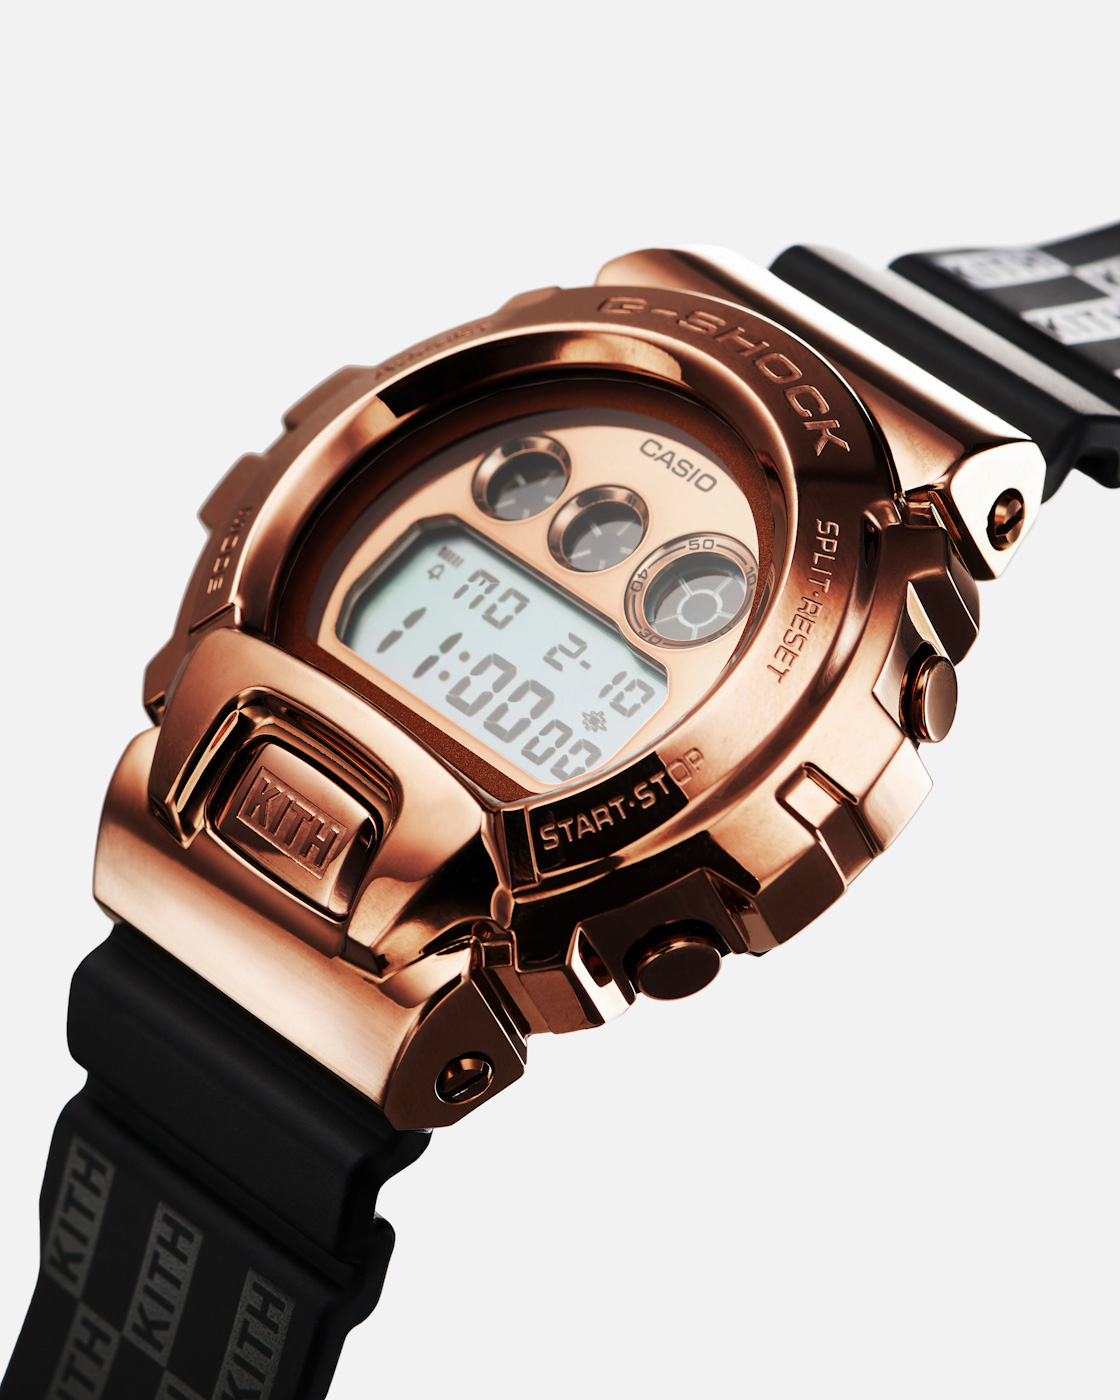 aBlogtoWatch Weekly News Roundup: February 1 - February 8, 2021 Watch Industry News 